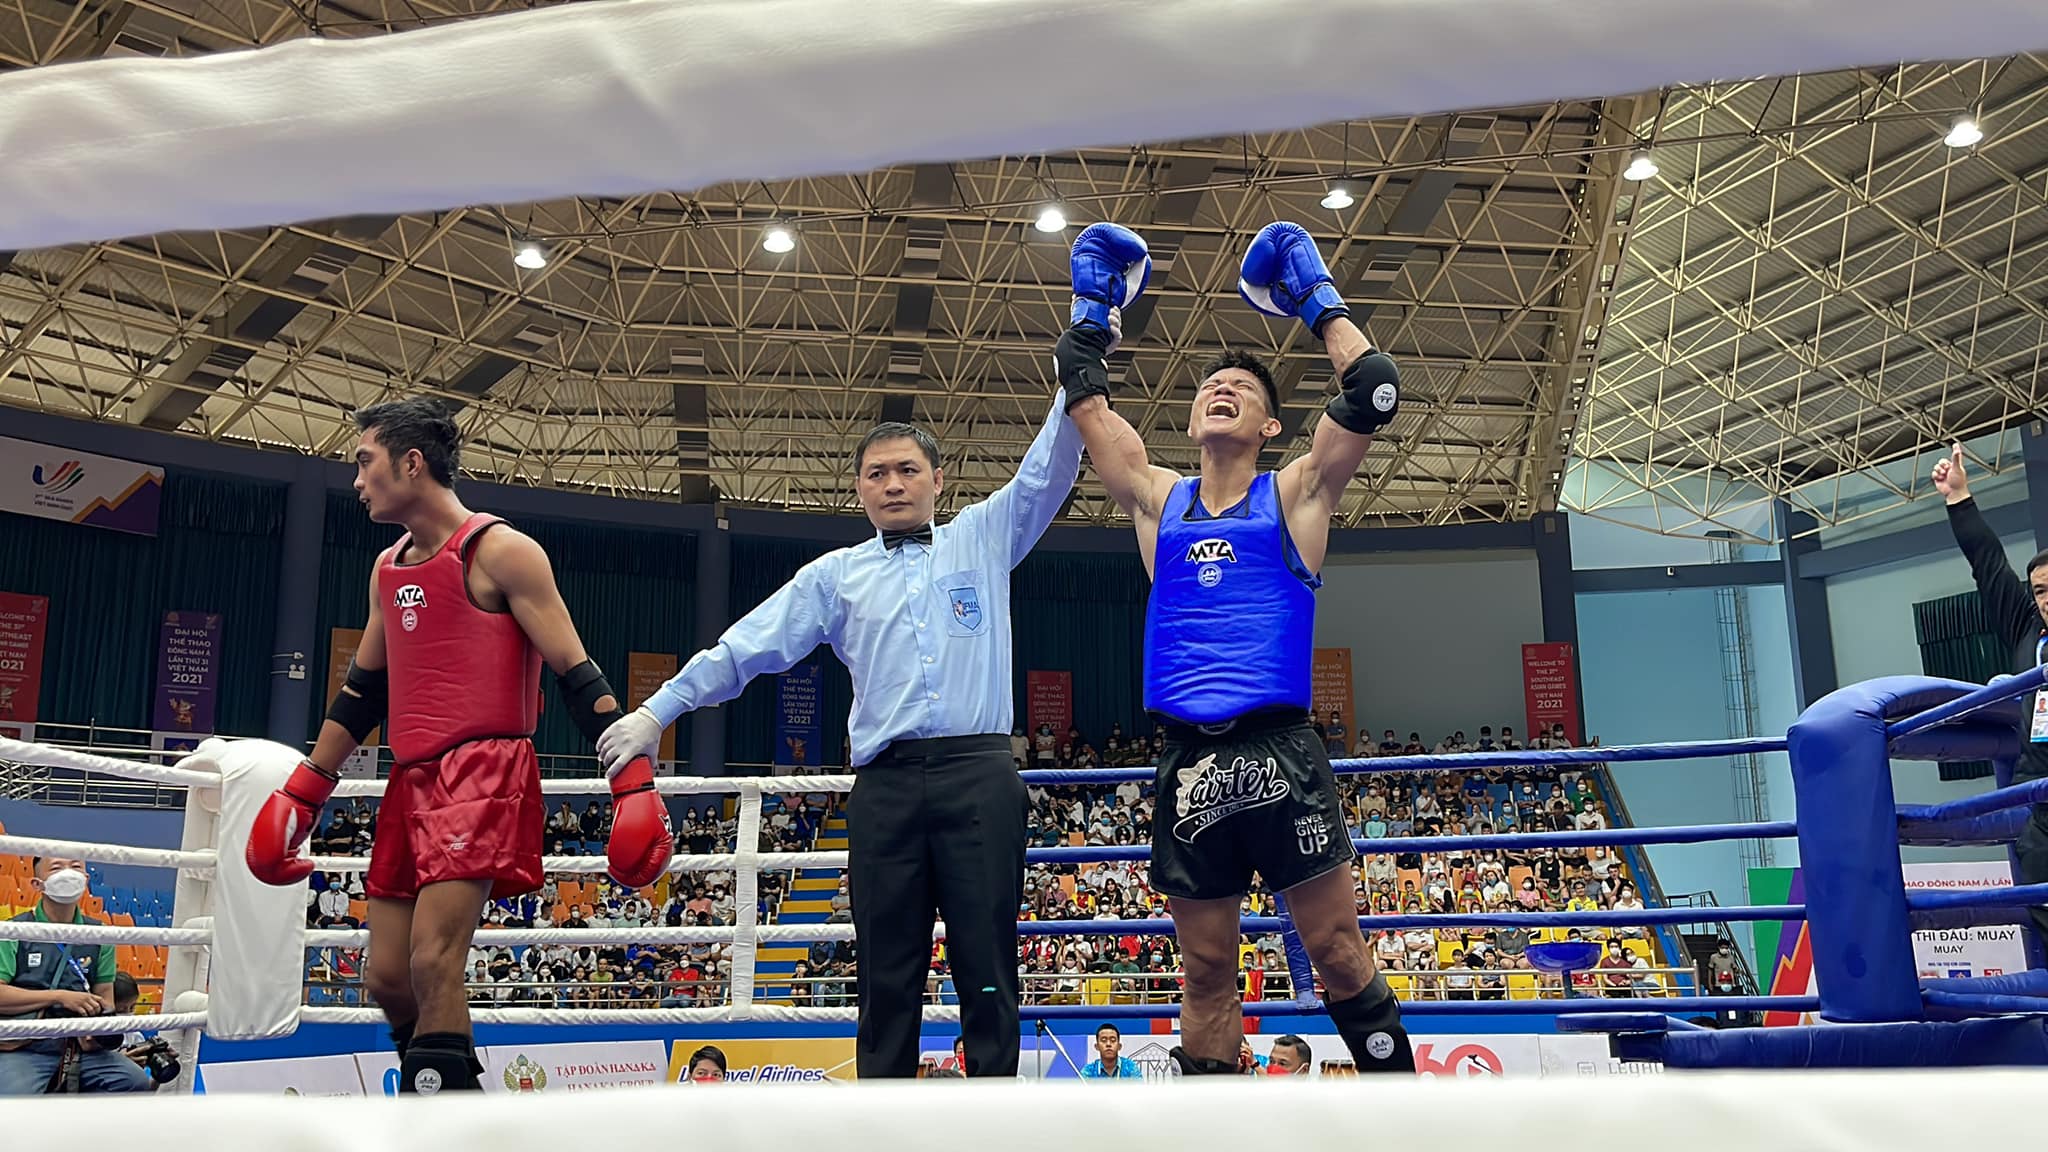 Muay's Phillip Delarmino delivers a gold medal to cap off the country's 31st SEA Games campaign. Photo via Muaythai Association of the Philippines 